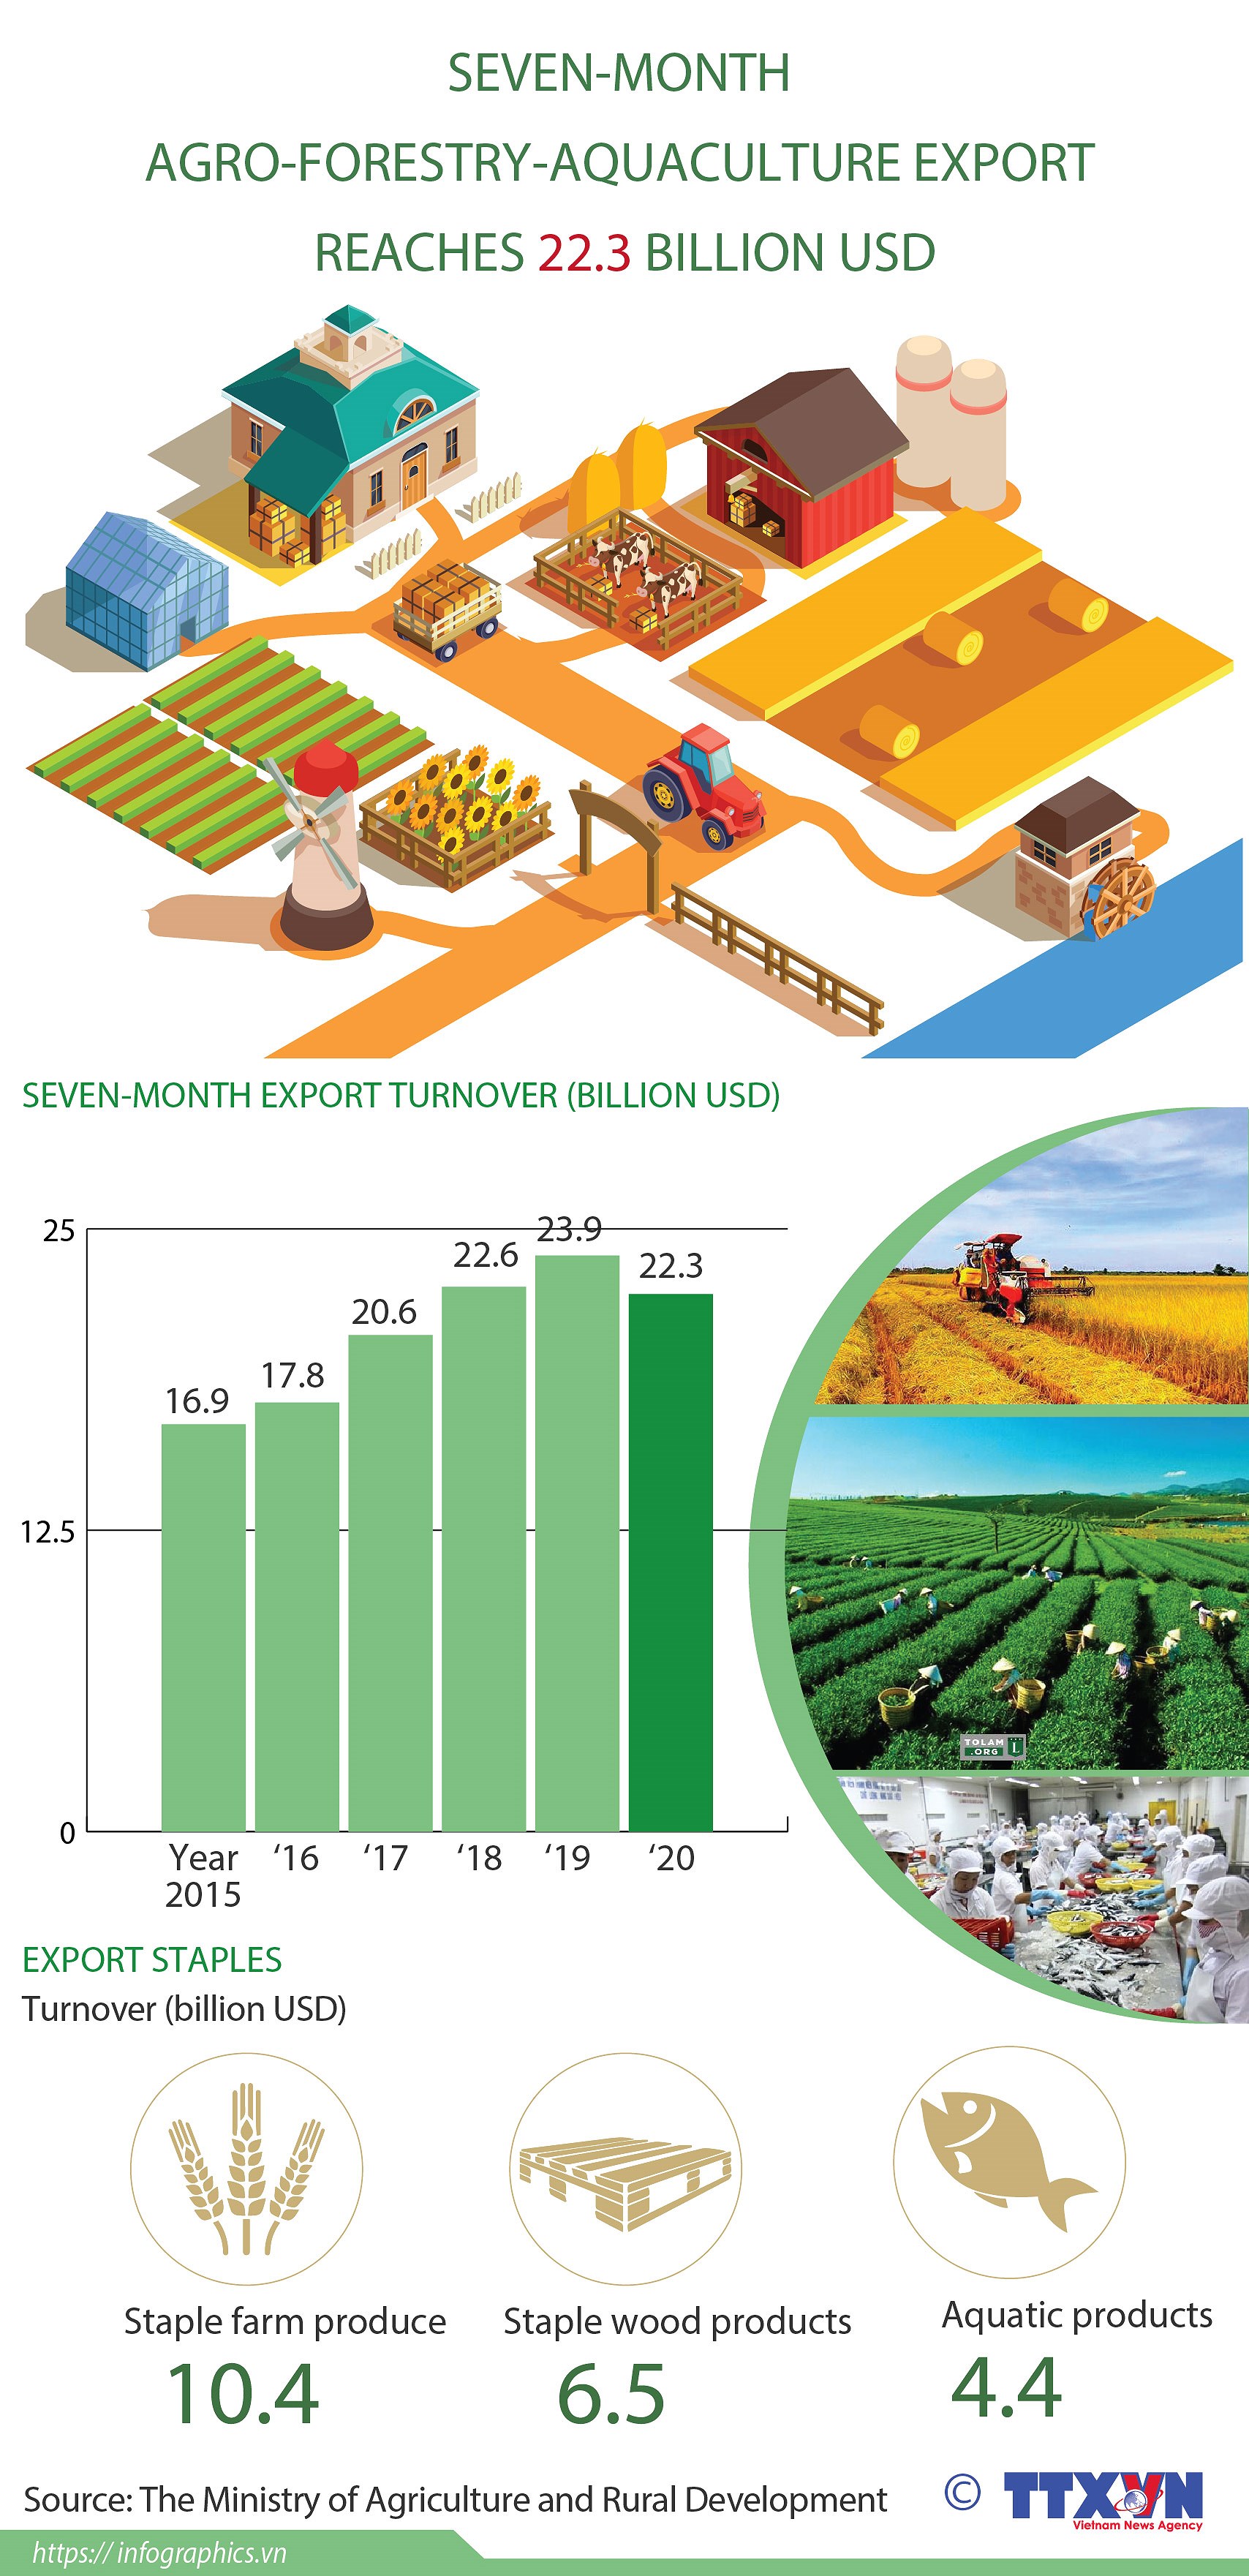 Seven-month agro-forestry-aquaculture export reaches 22.3 billion USD hinh anh 1